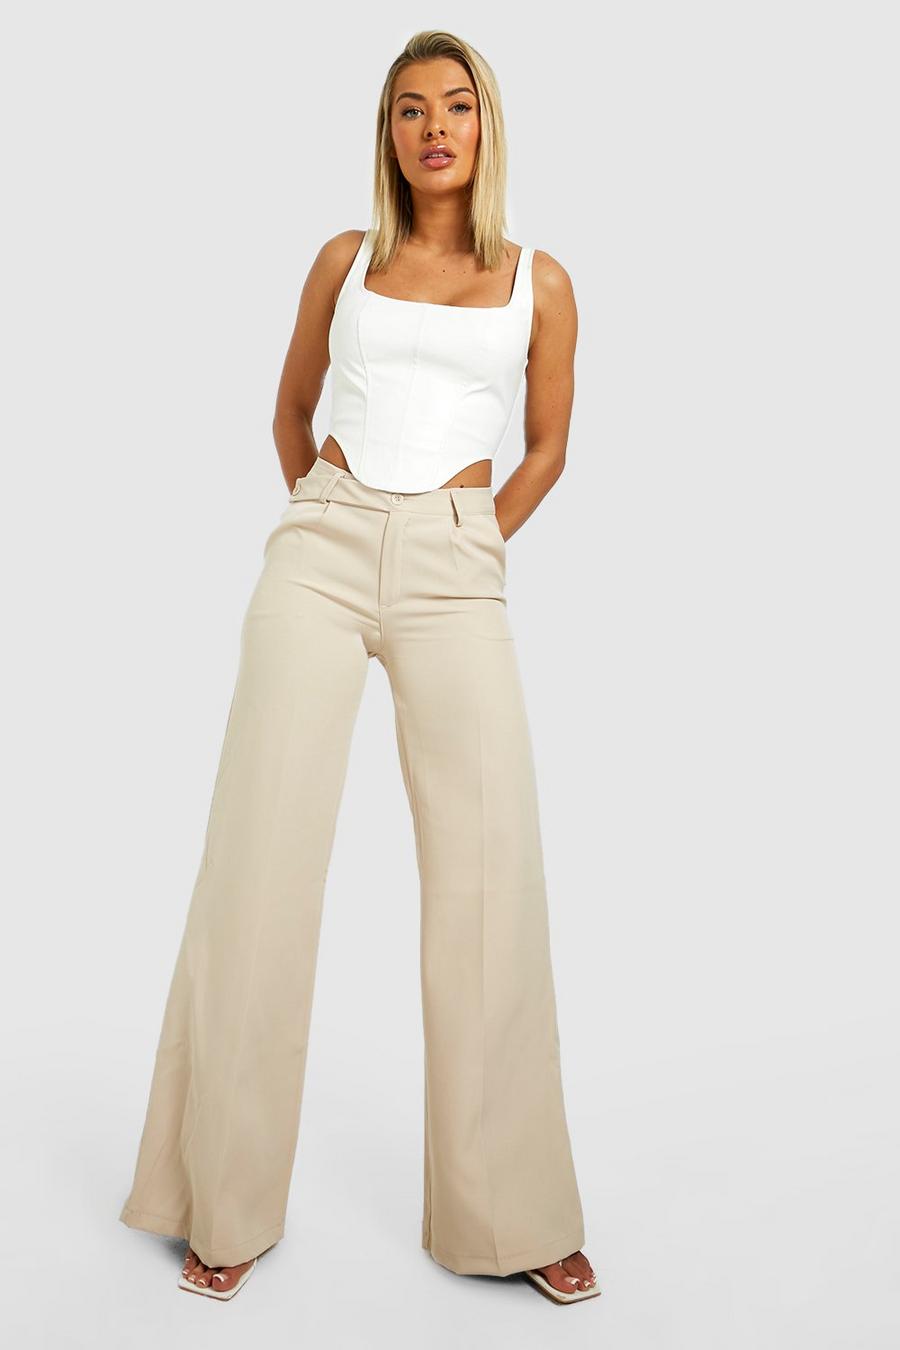 Stone beige Waistband Detail Relaxed Fit Dress Pants image number 1